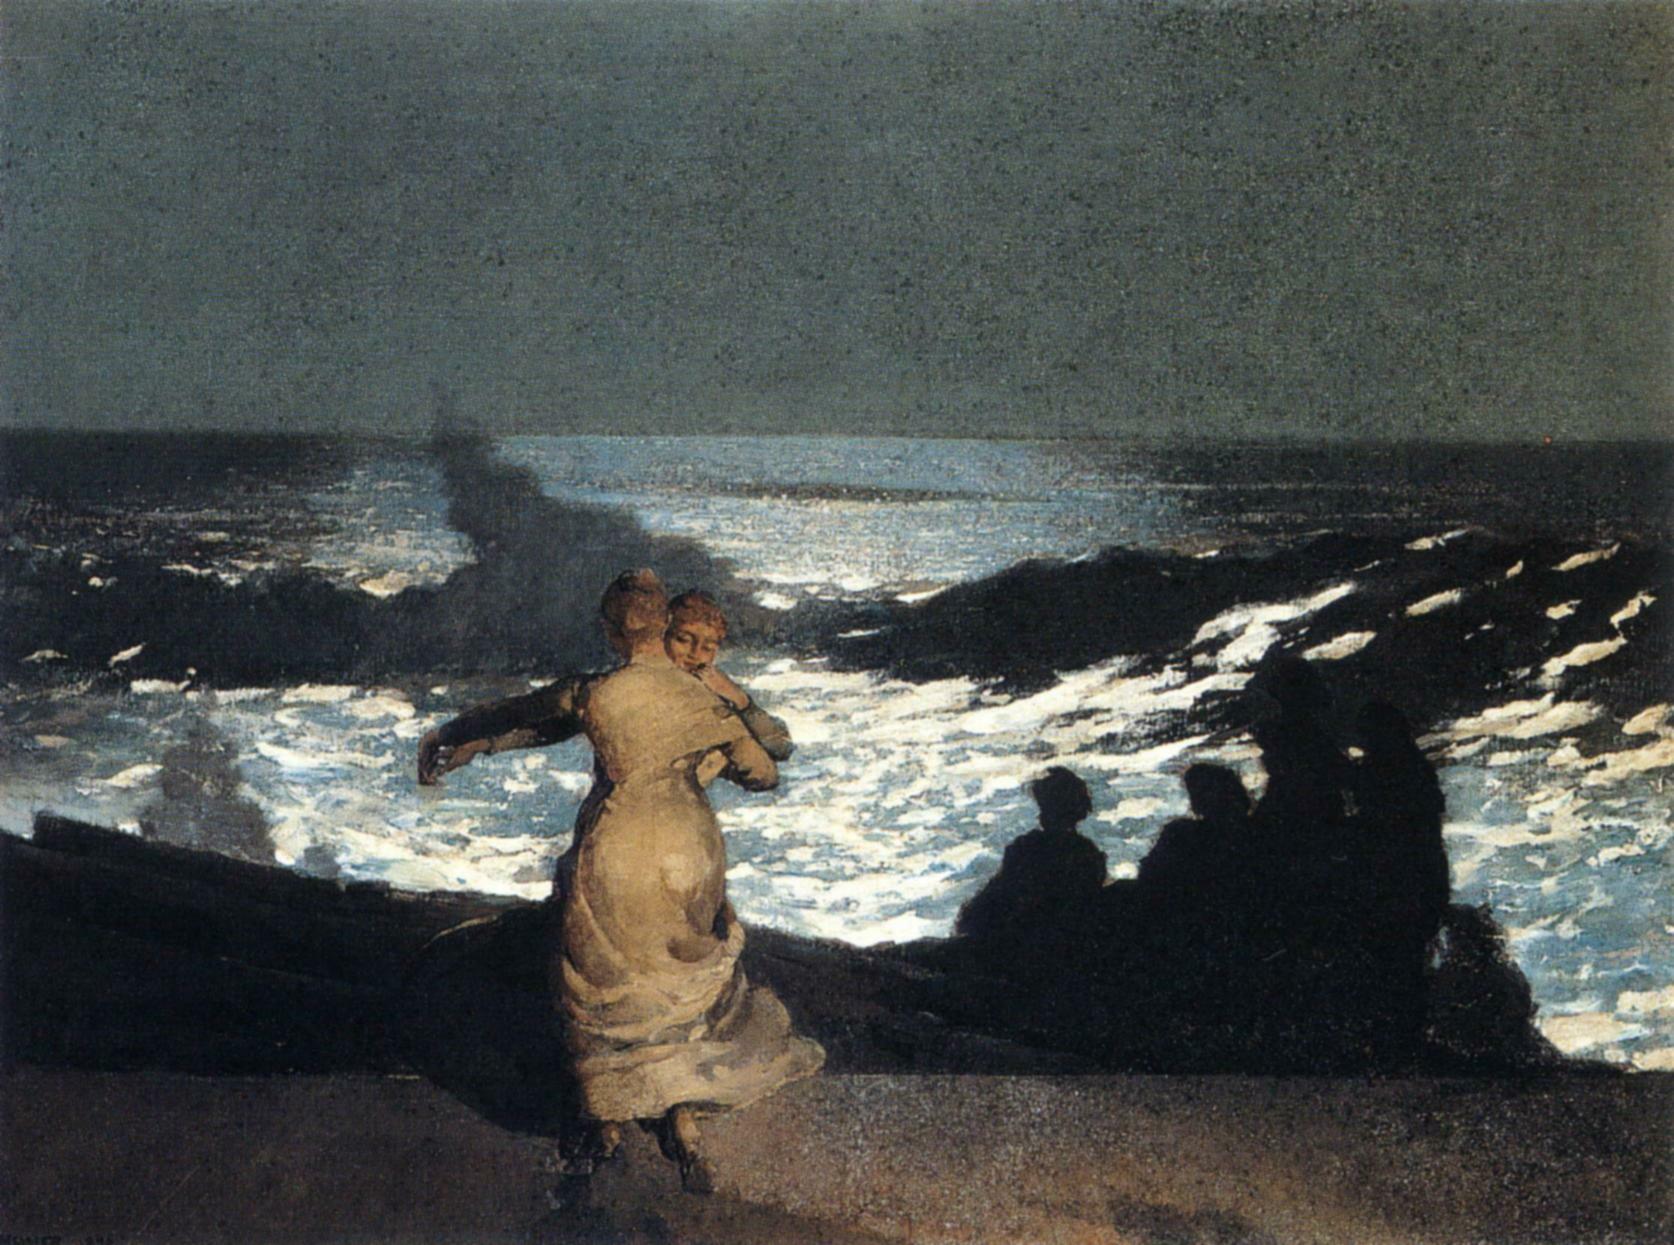 Summer Night by Winslow Homer - 1890 - 76.7 x 102 cm Musée d'Orsay